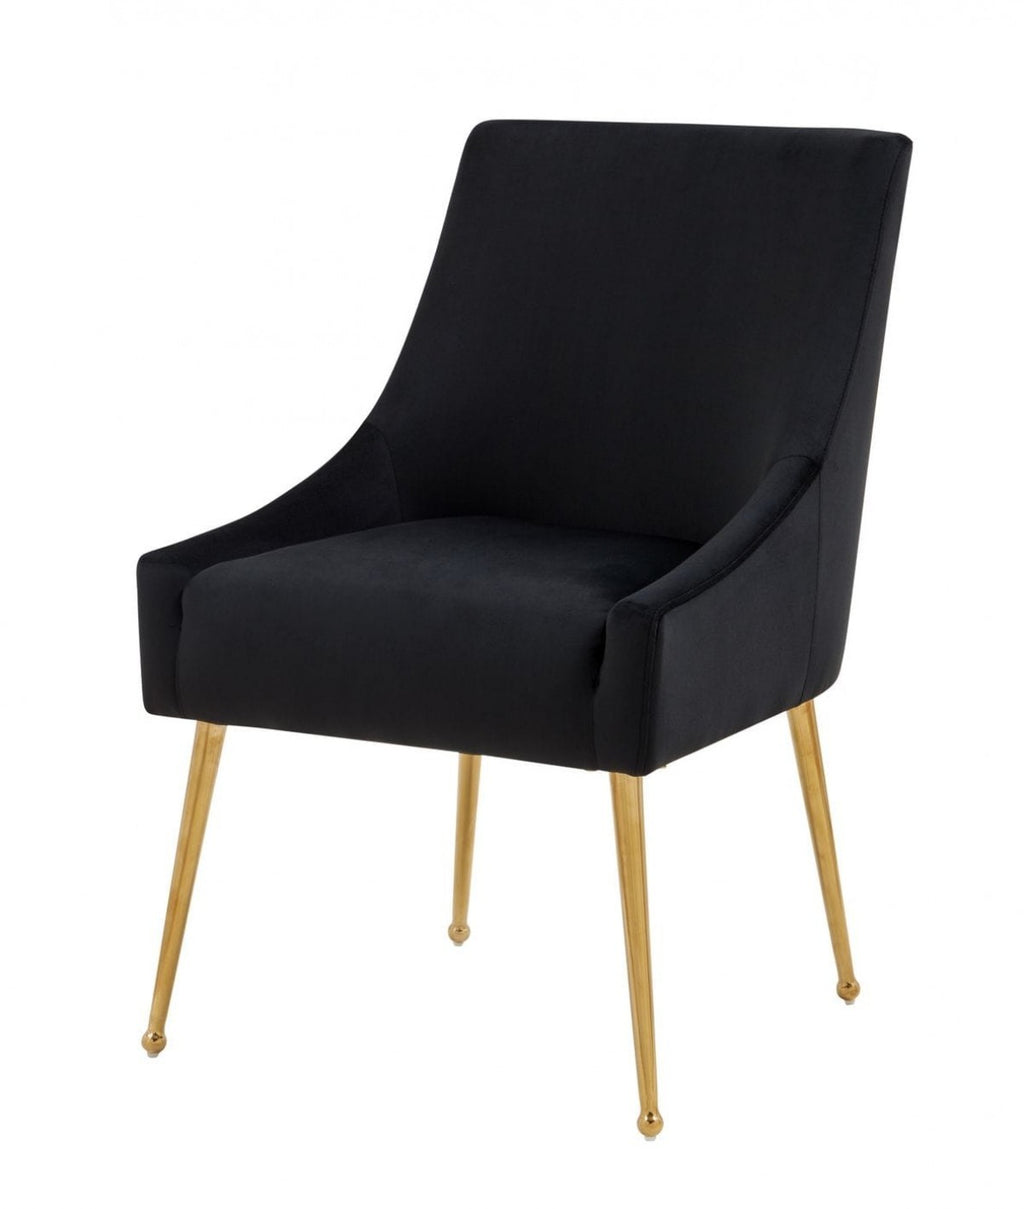 Set of Two Black Gold Velvet Dining Chairs - 99fab 